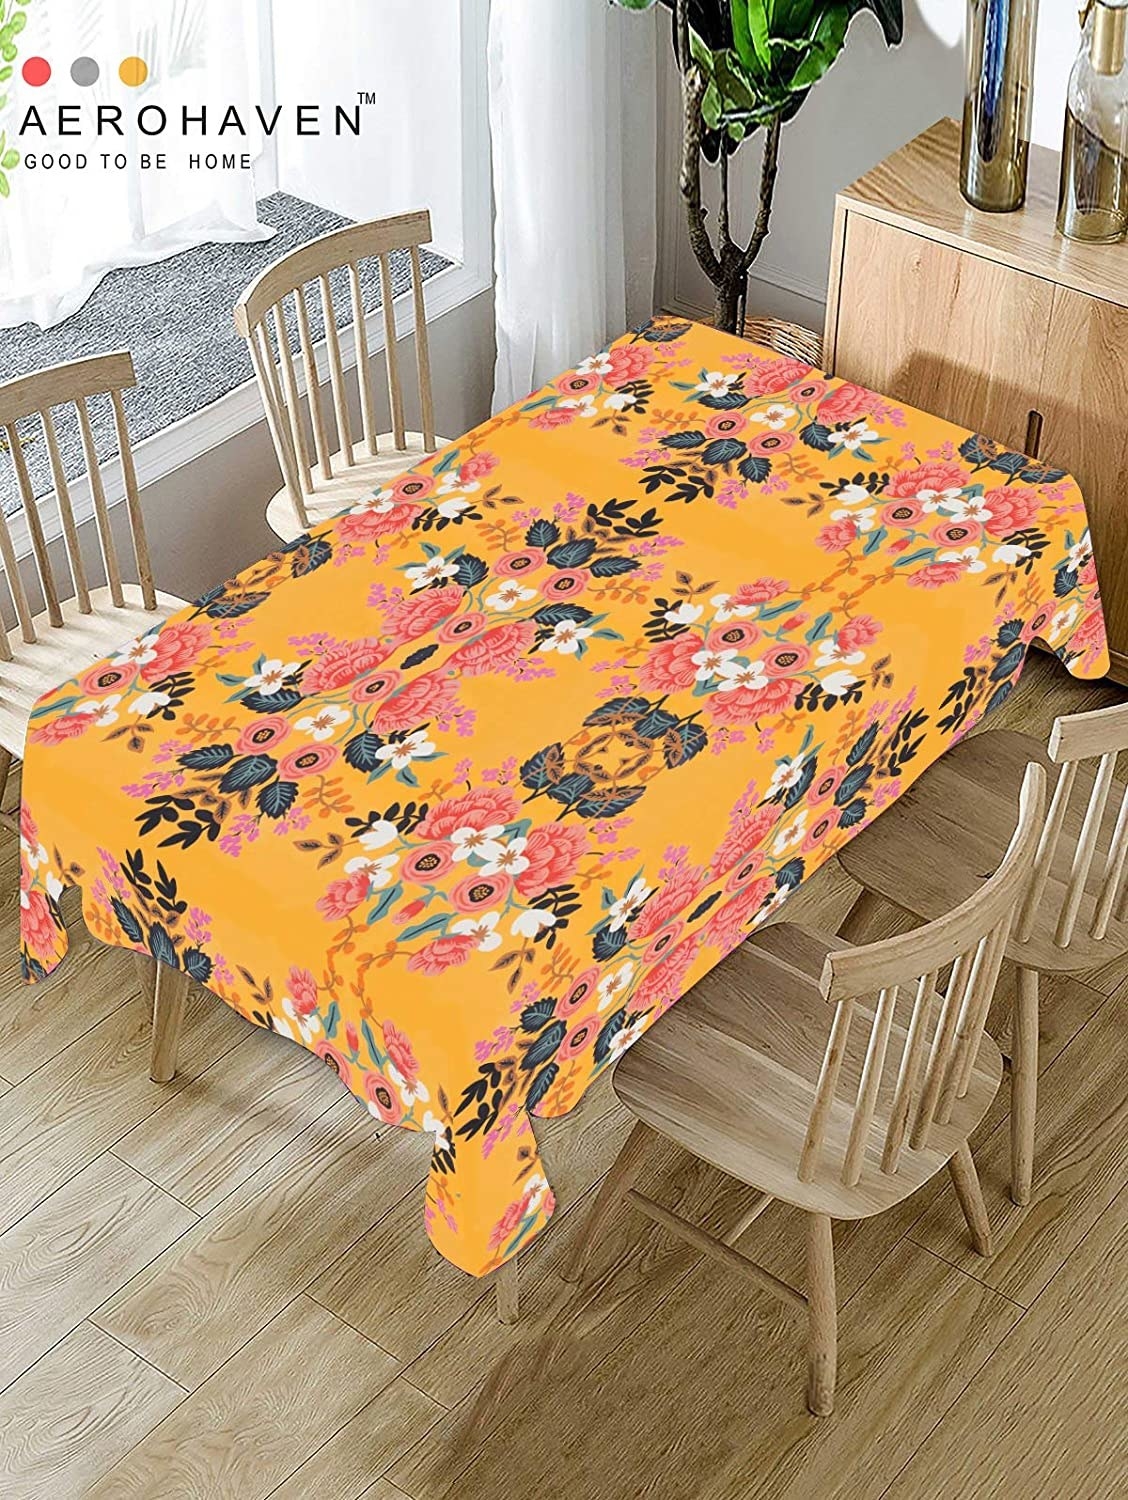 A yellow floral table cover on a table with chairs beside it